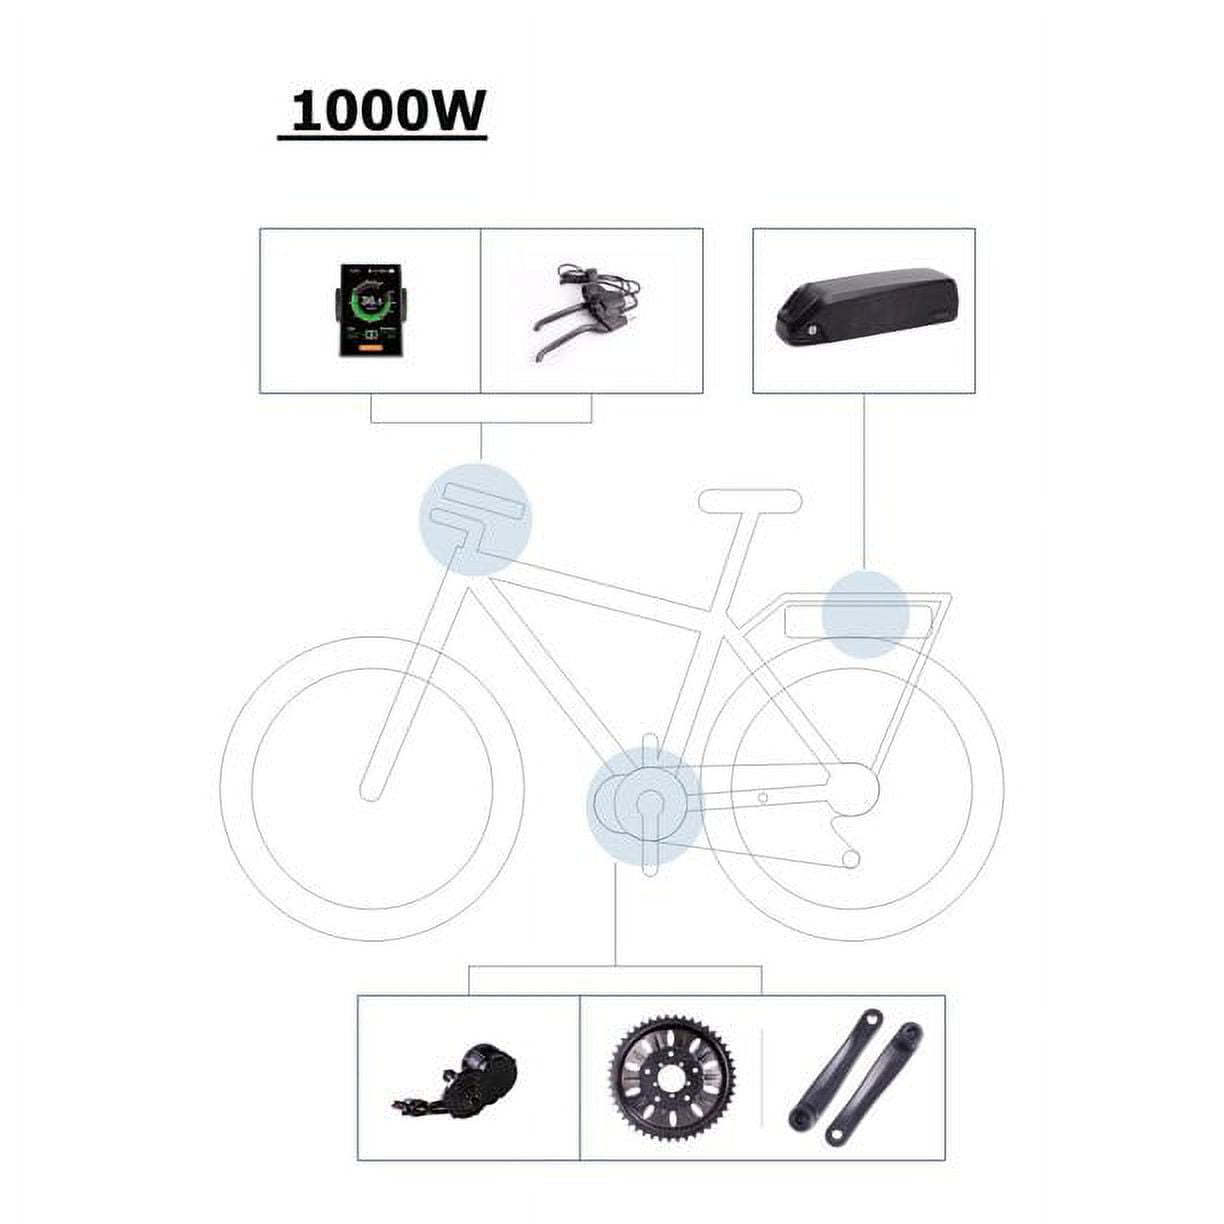 Bafang 48V (works with both 13S and 14S batteries) 1000W BBSHD Ebike Kit  (~1500W max) Mid Drive Kit With Battery Pack Option